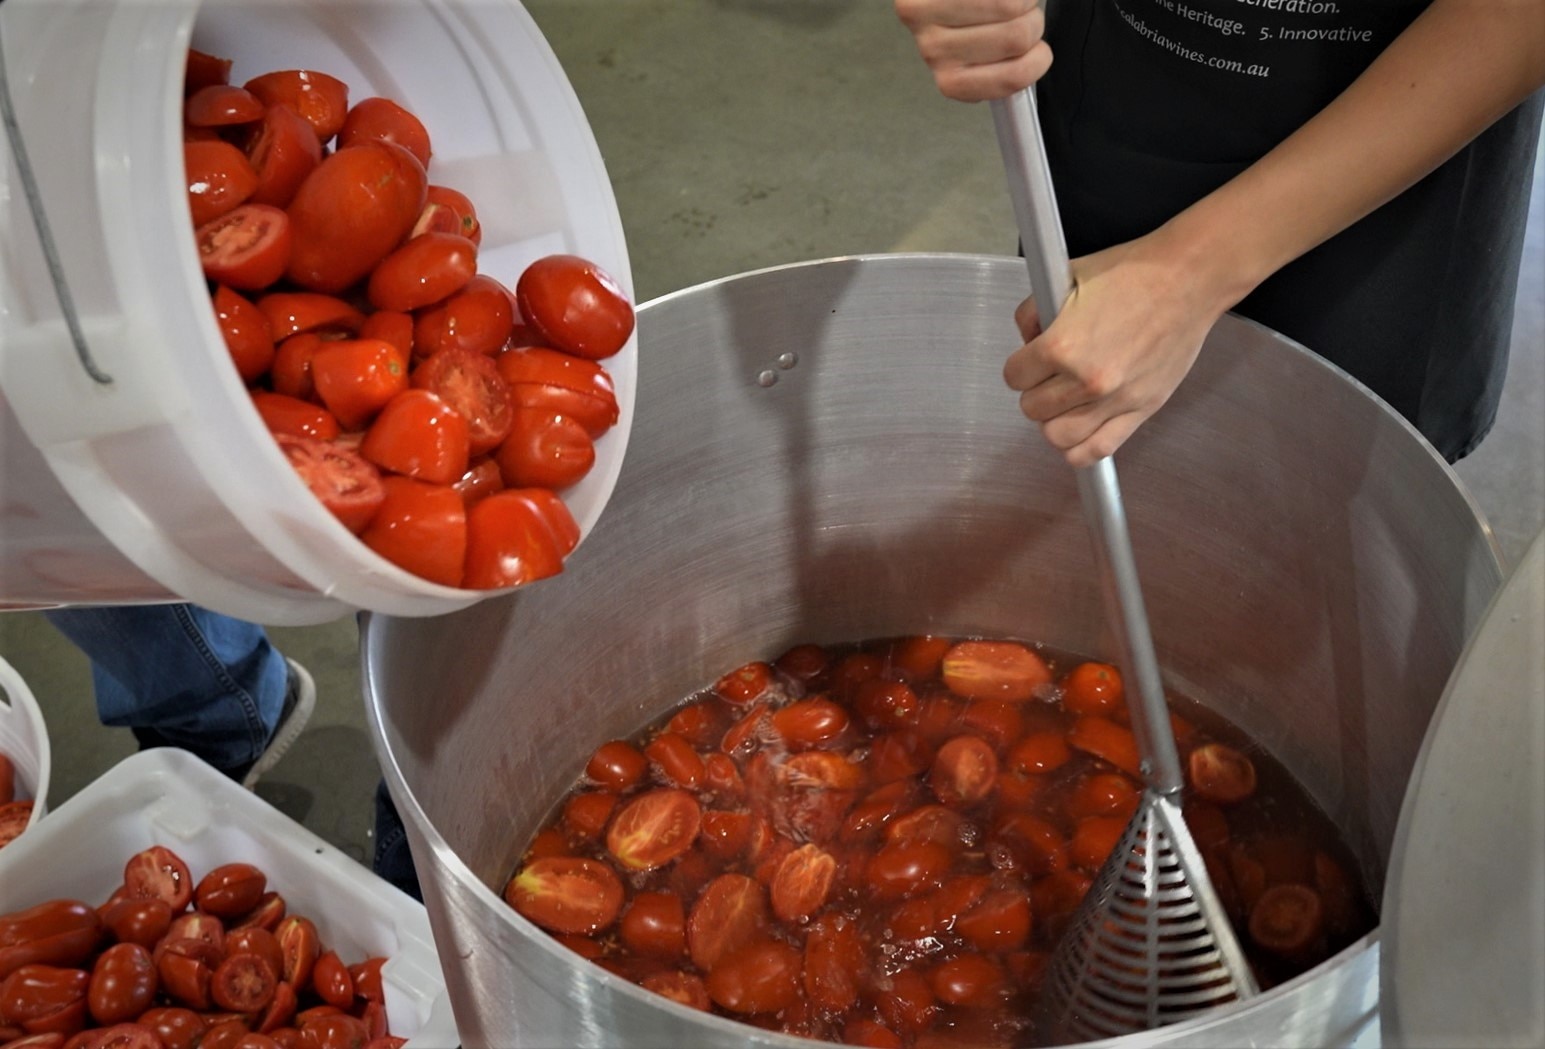 The Calabria family still makes traditional tomato sauce.